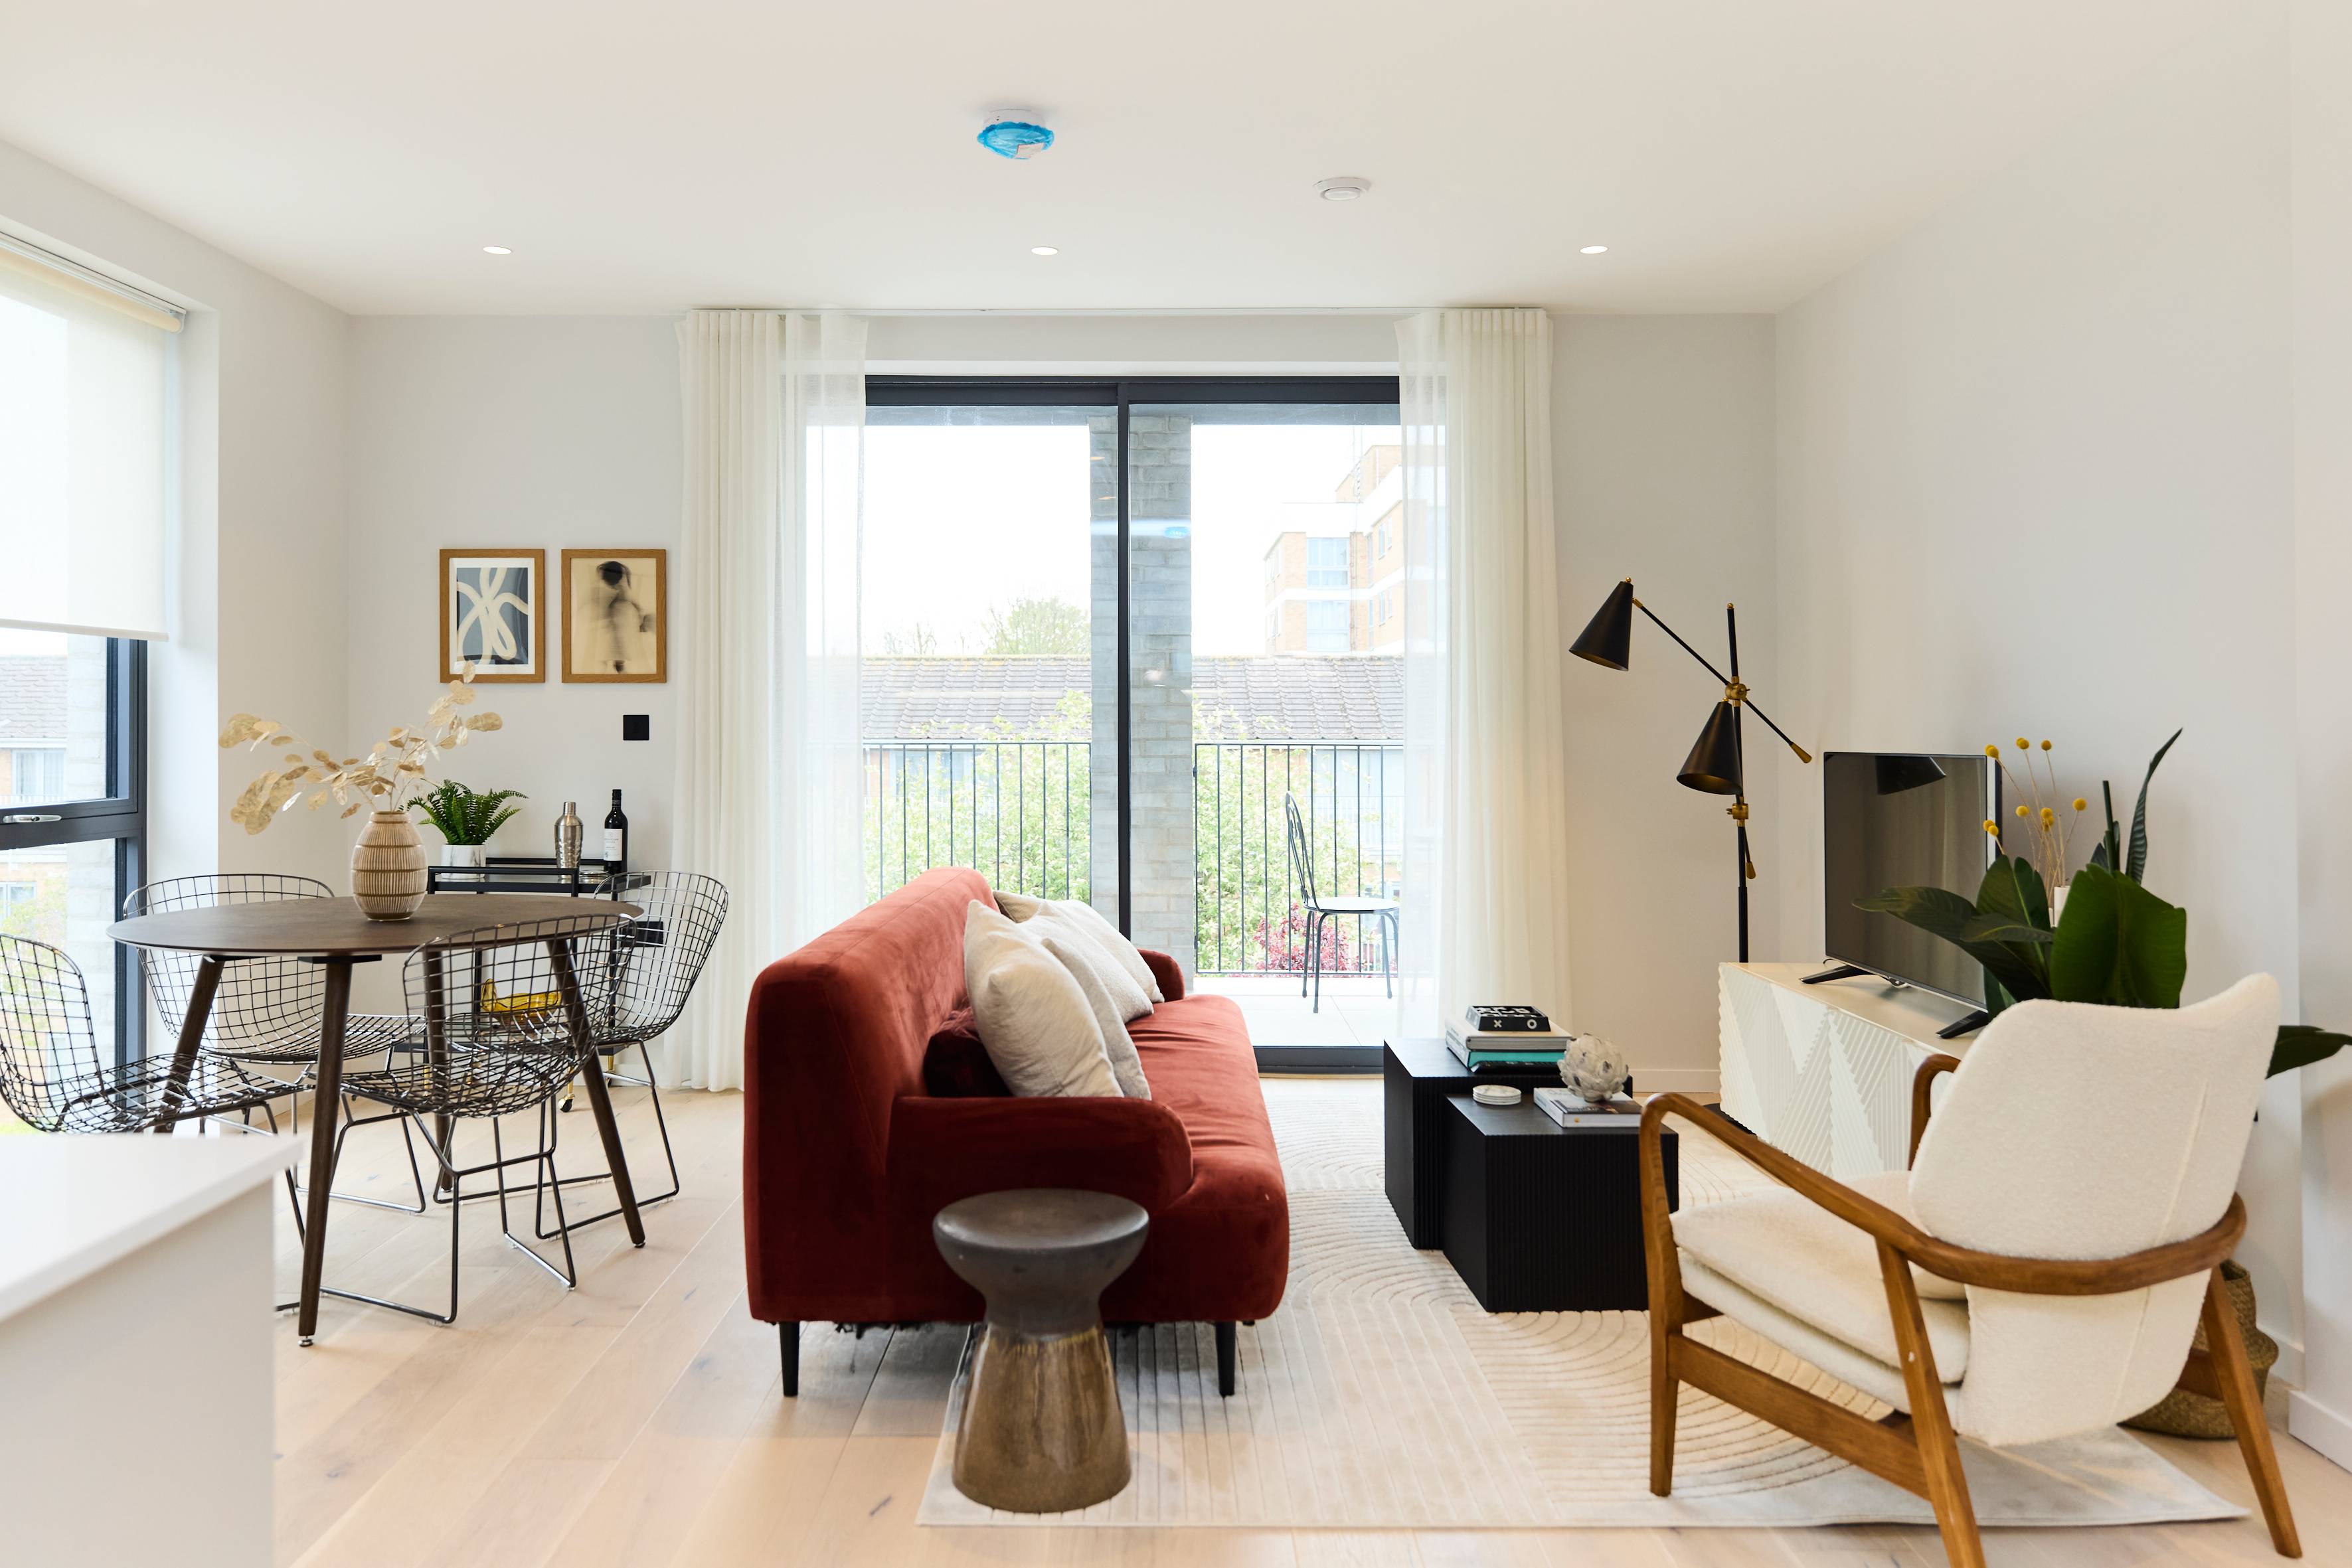 Brand New Contemporary One-Bedroom Flat in Friendly Brondesbury, North West London